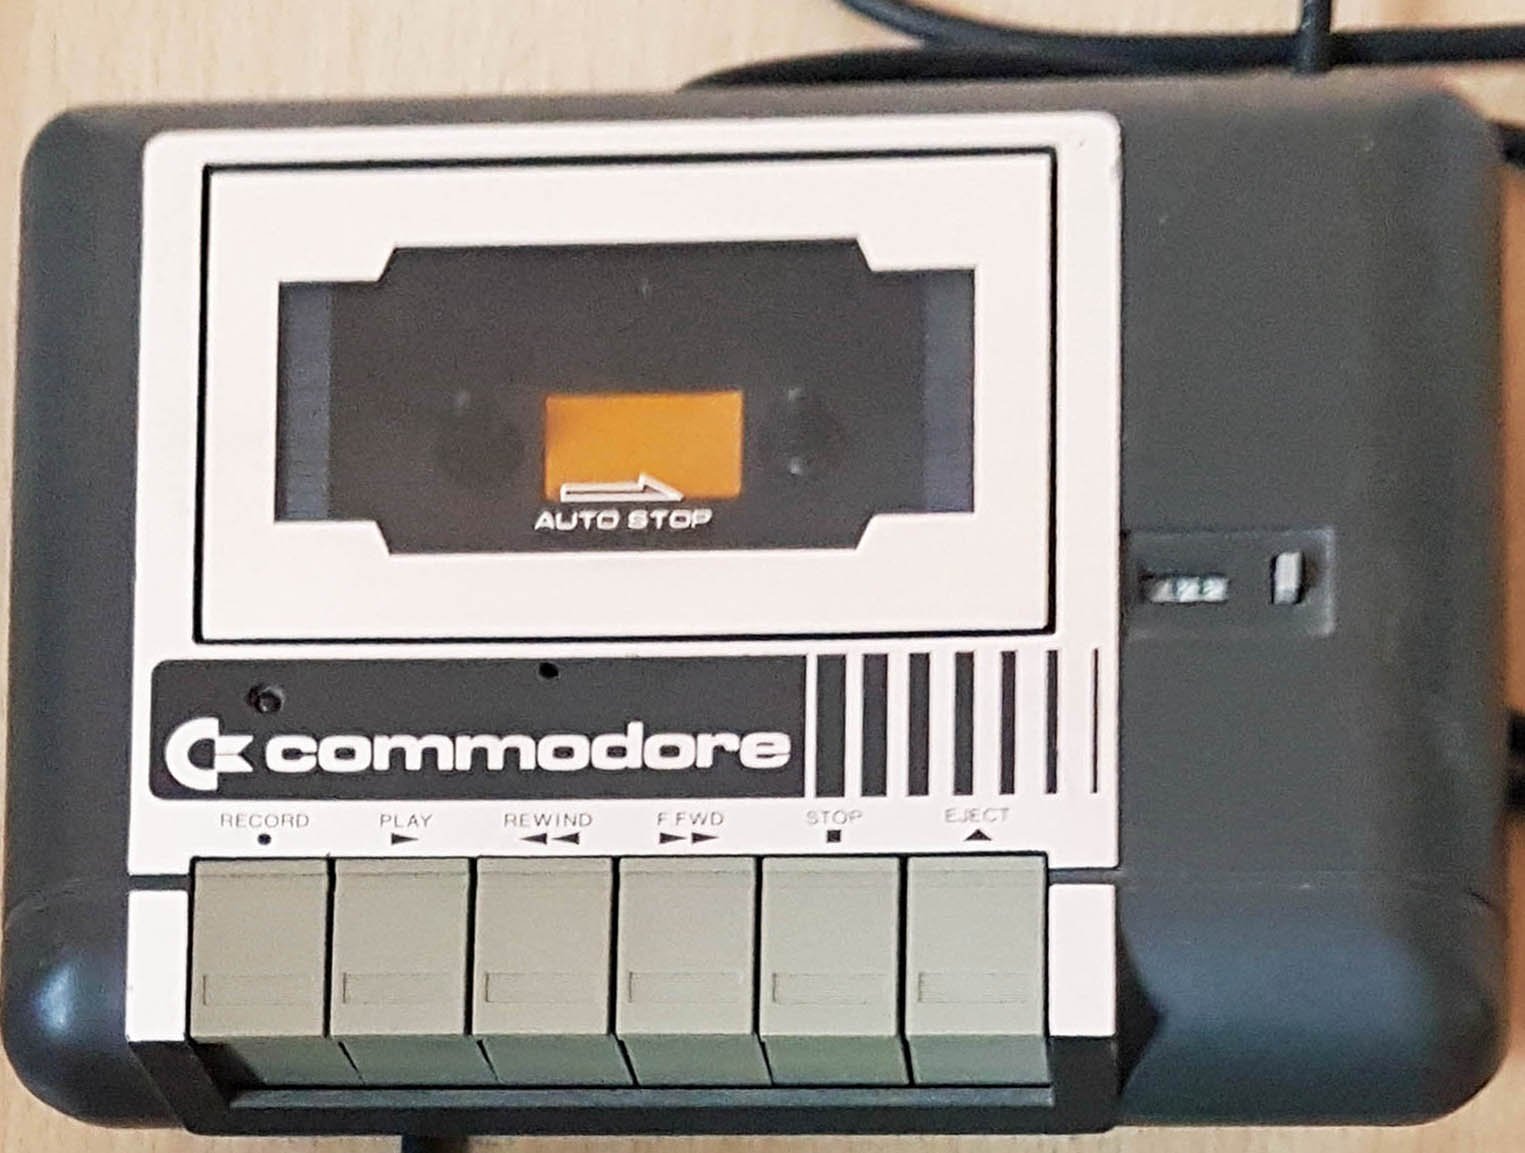 Datasette Commodore 1531 (museum comp:ex CC BY-NC-SA)